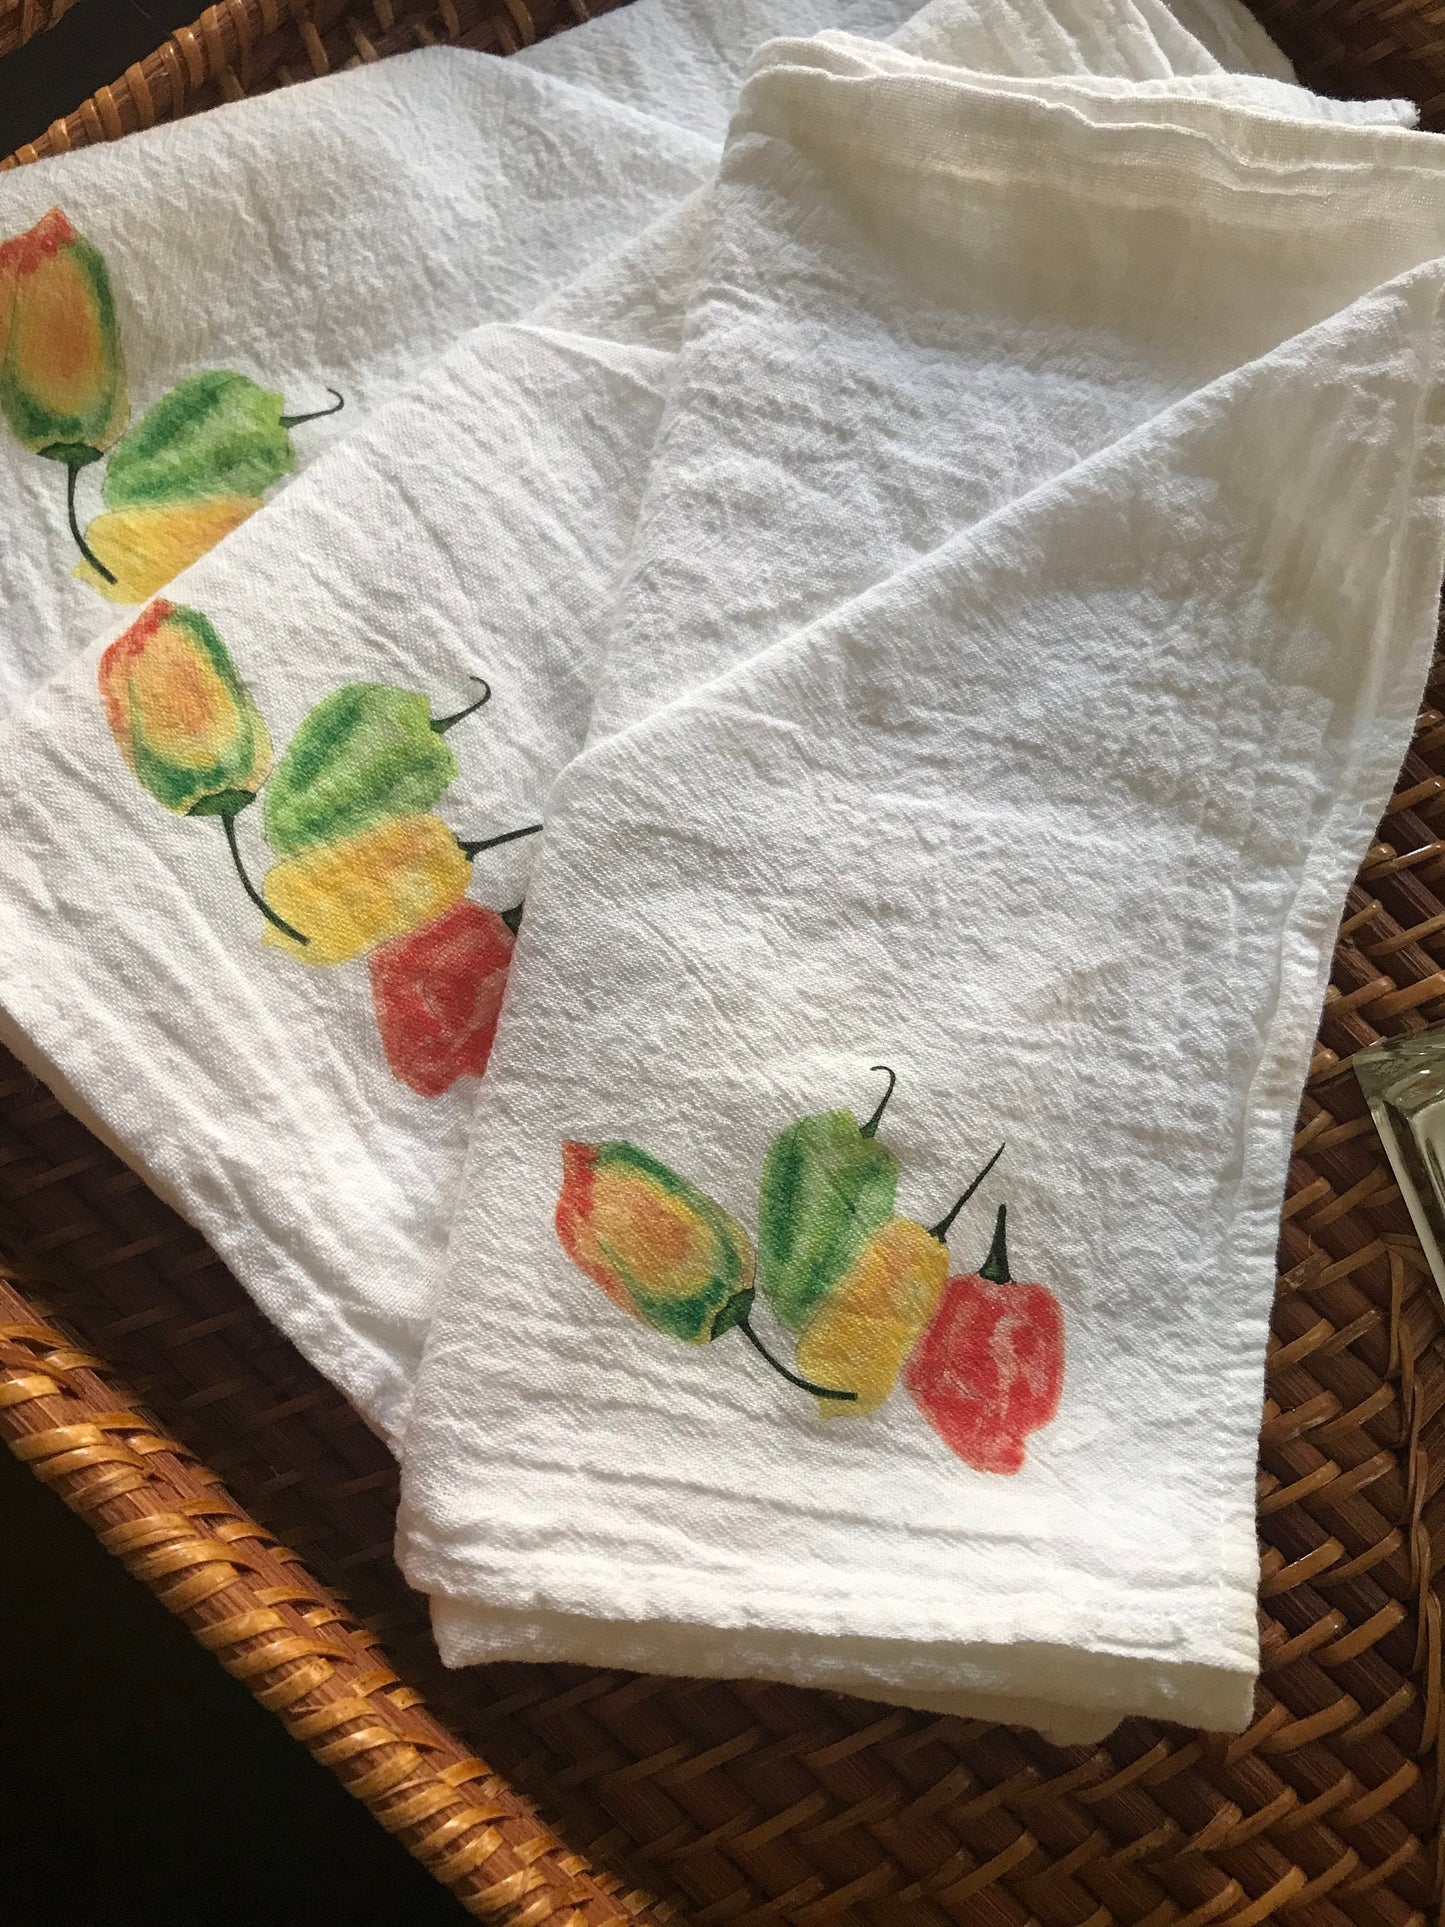 Hot Peppers Cotton Napkin Set